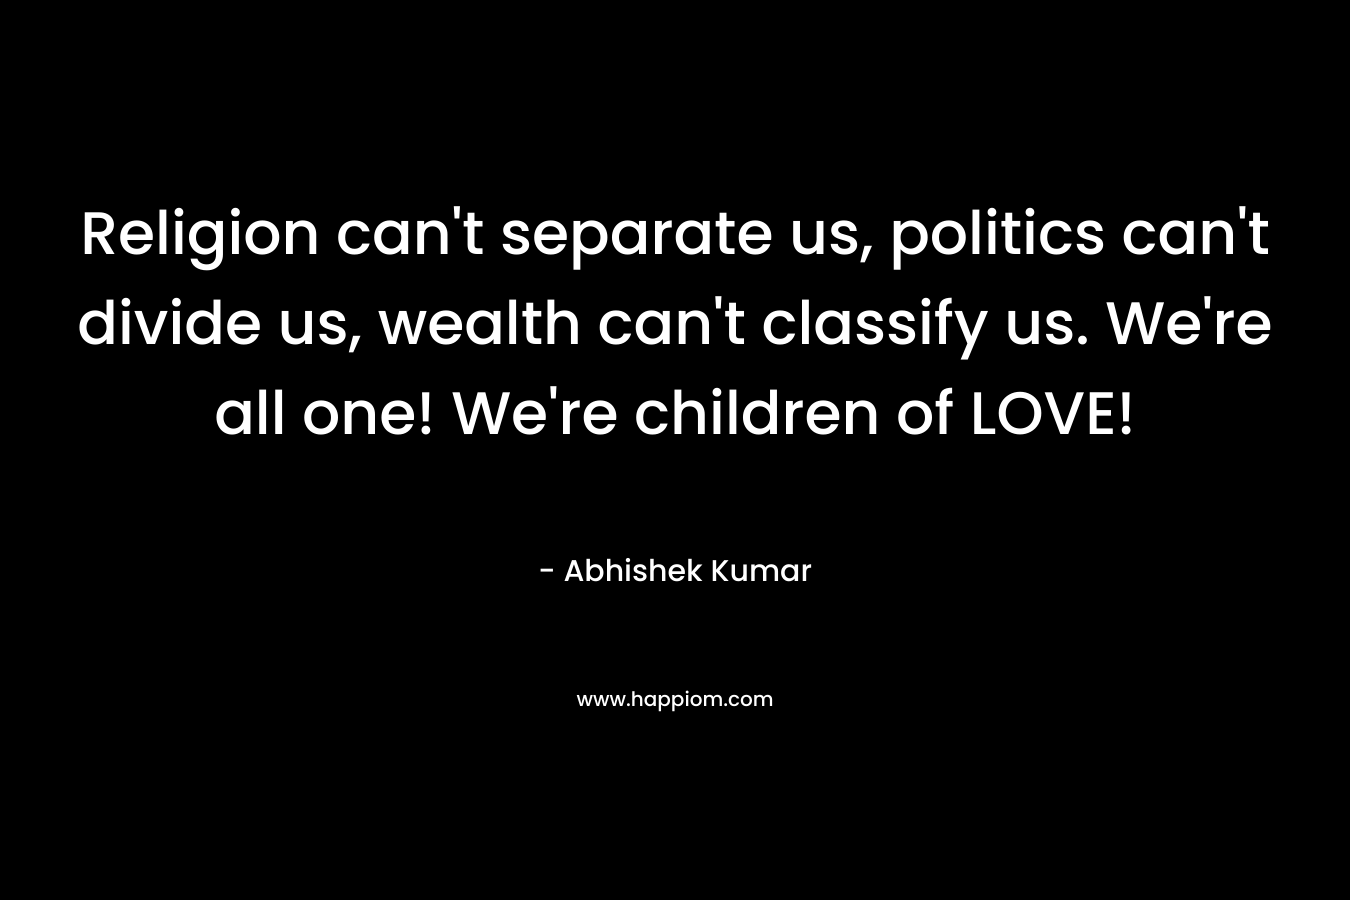 Religion can't separate us, politics can't divide us, wealth can't classify us. We're all one! We're children of LOVE!